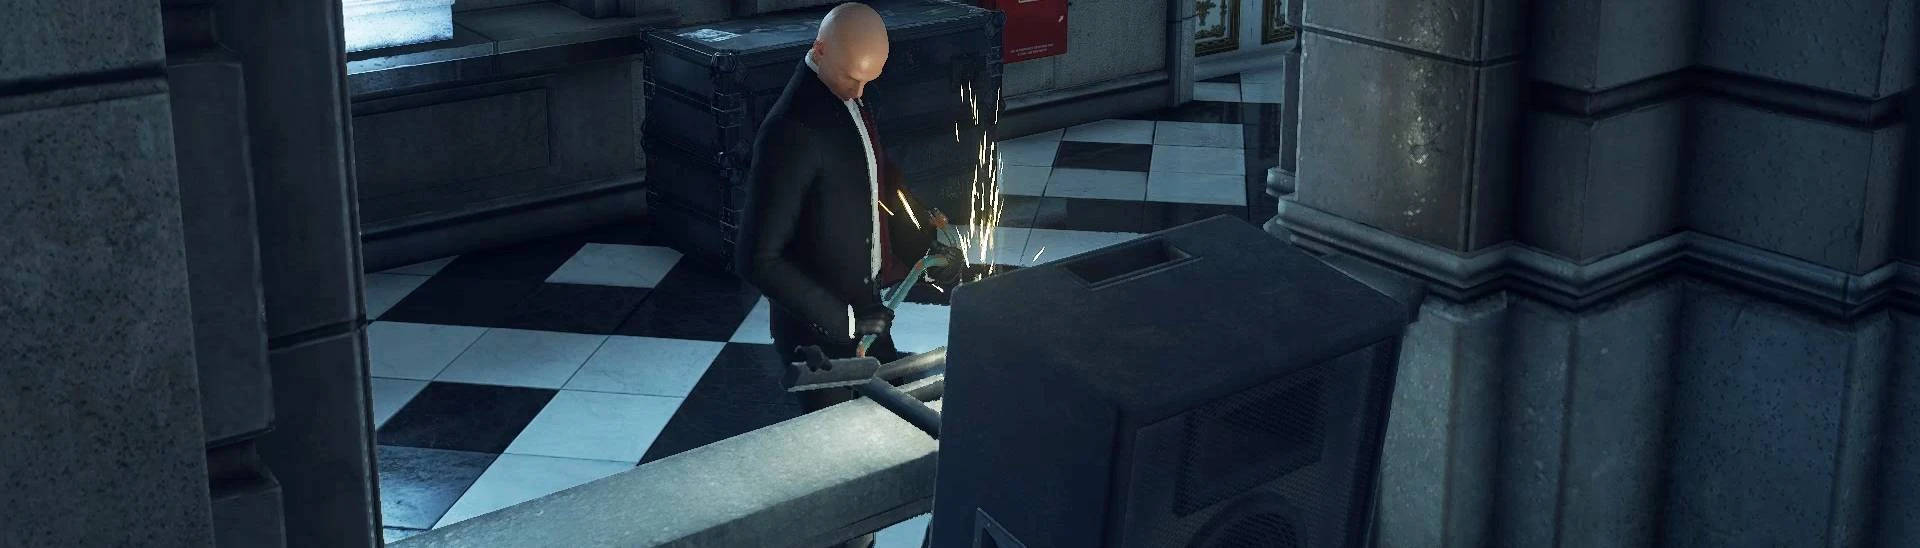 Tried to install Hitman Trilogy from Game Pass, download errored